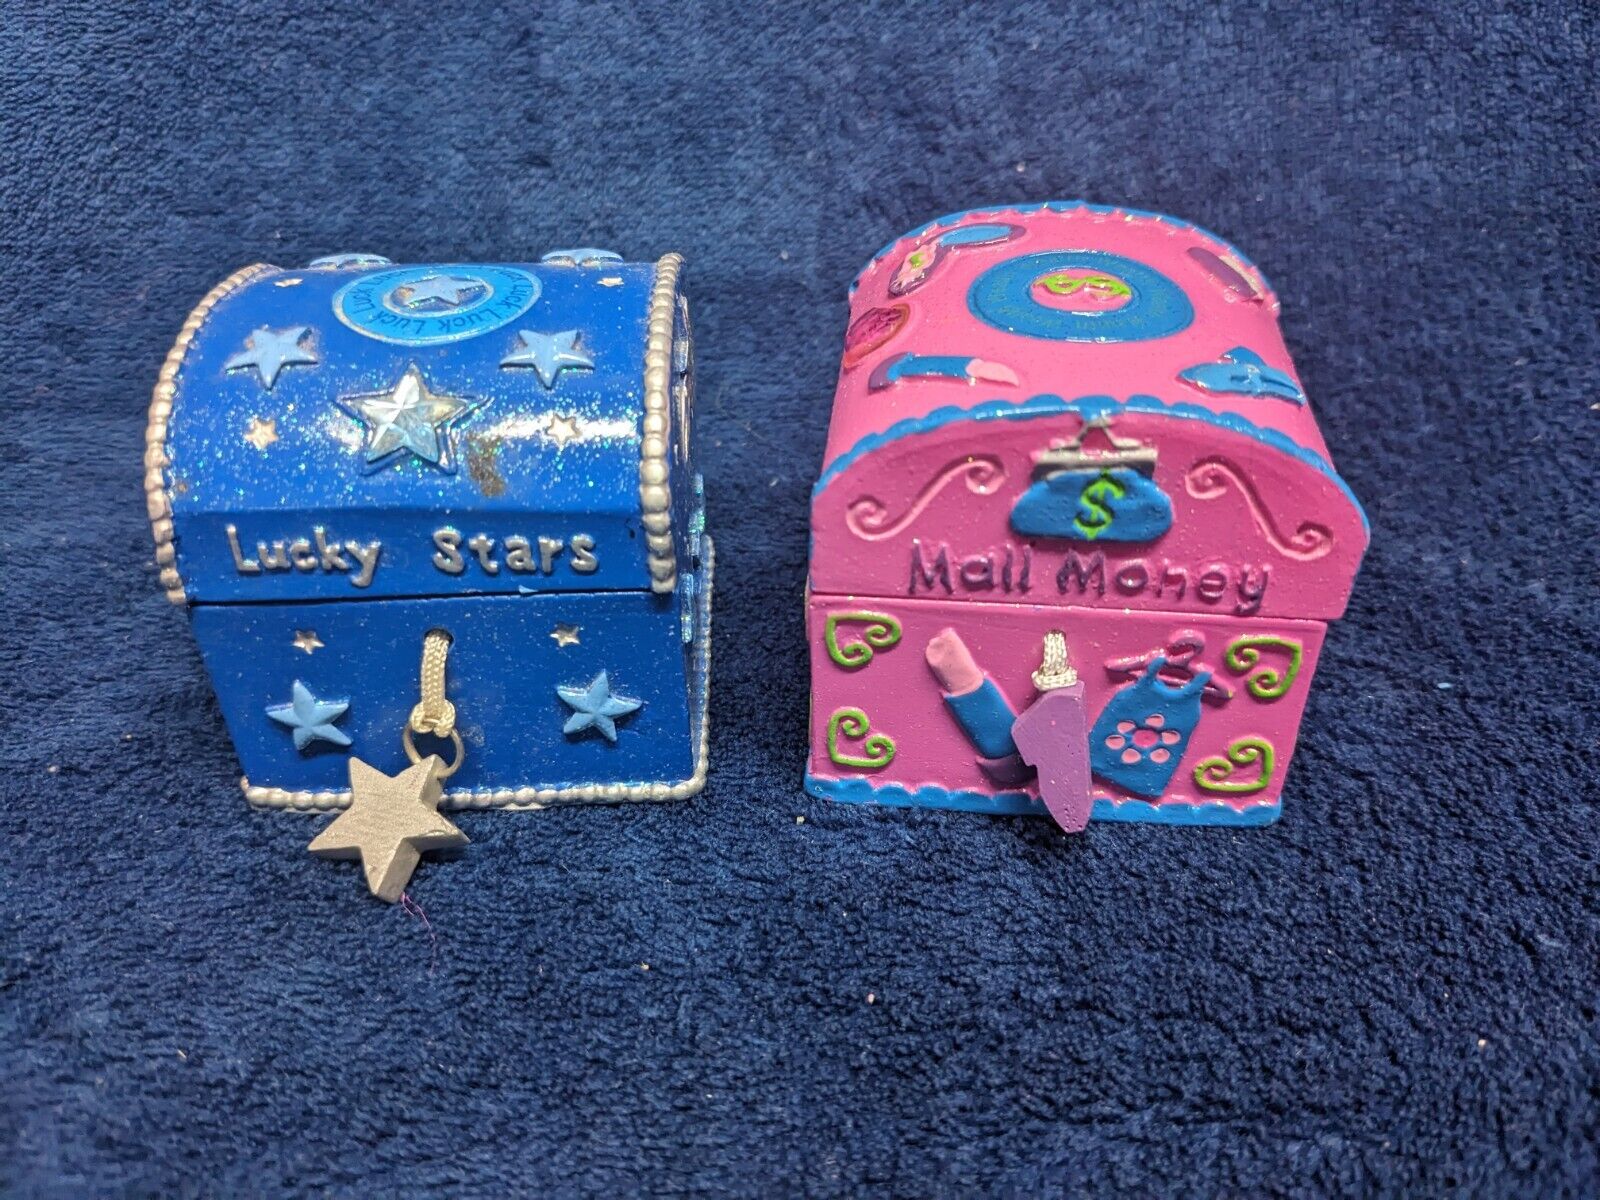 2 Claire’s 2000 Y2K Vintage Trinket Box Lot Lucky Star + Mall Money Wealth